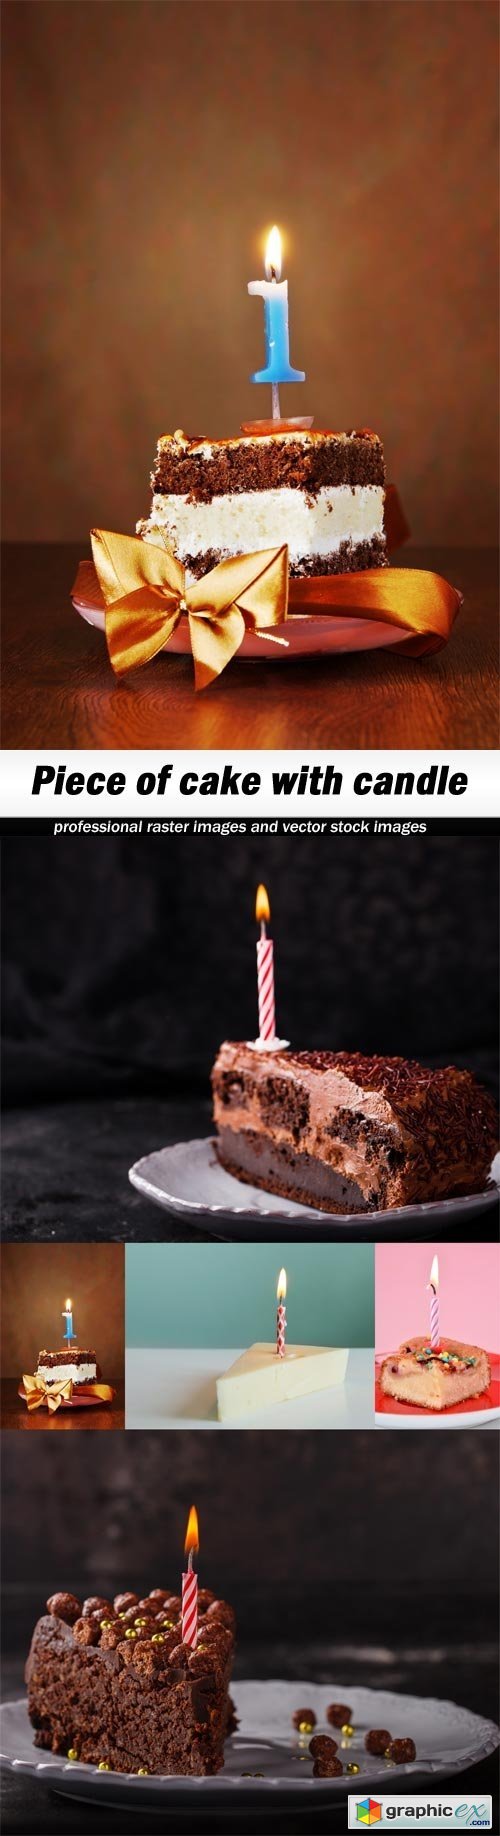 Piece of cake with candle-5xJPEGs